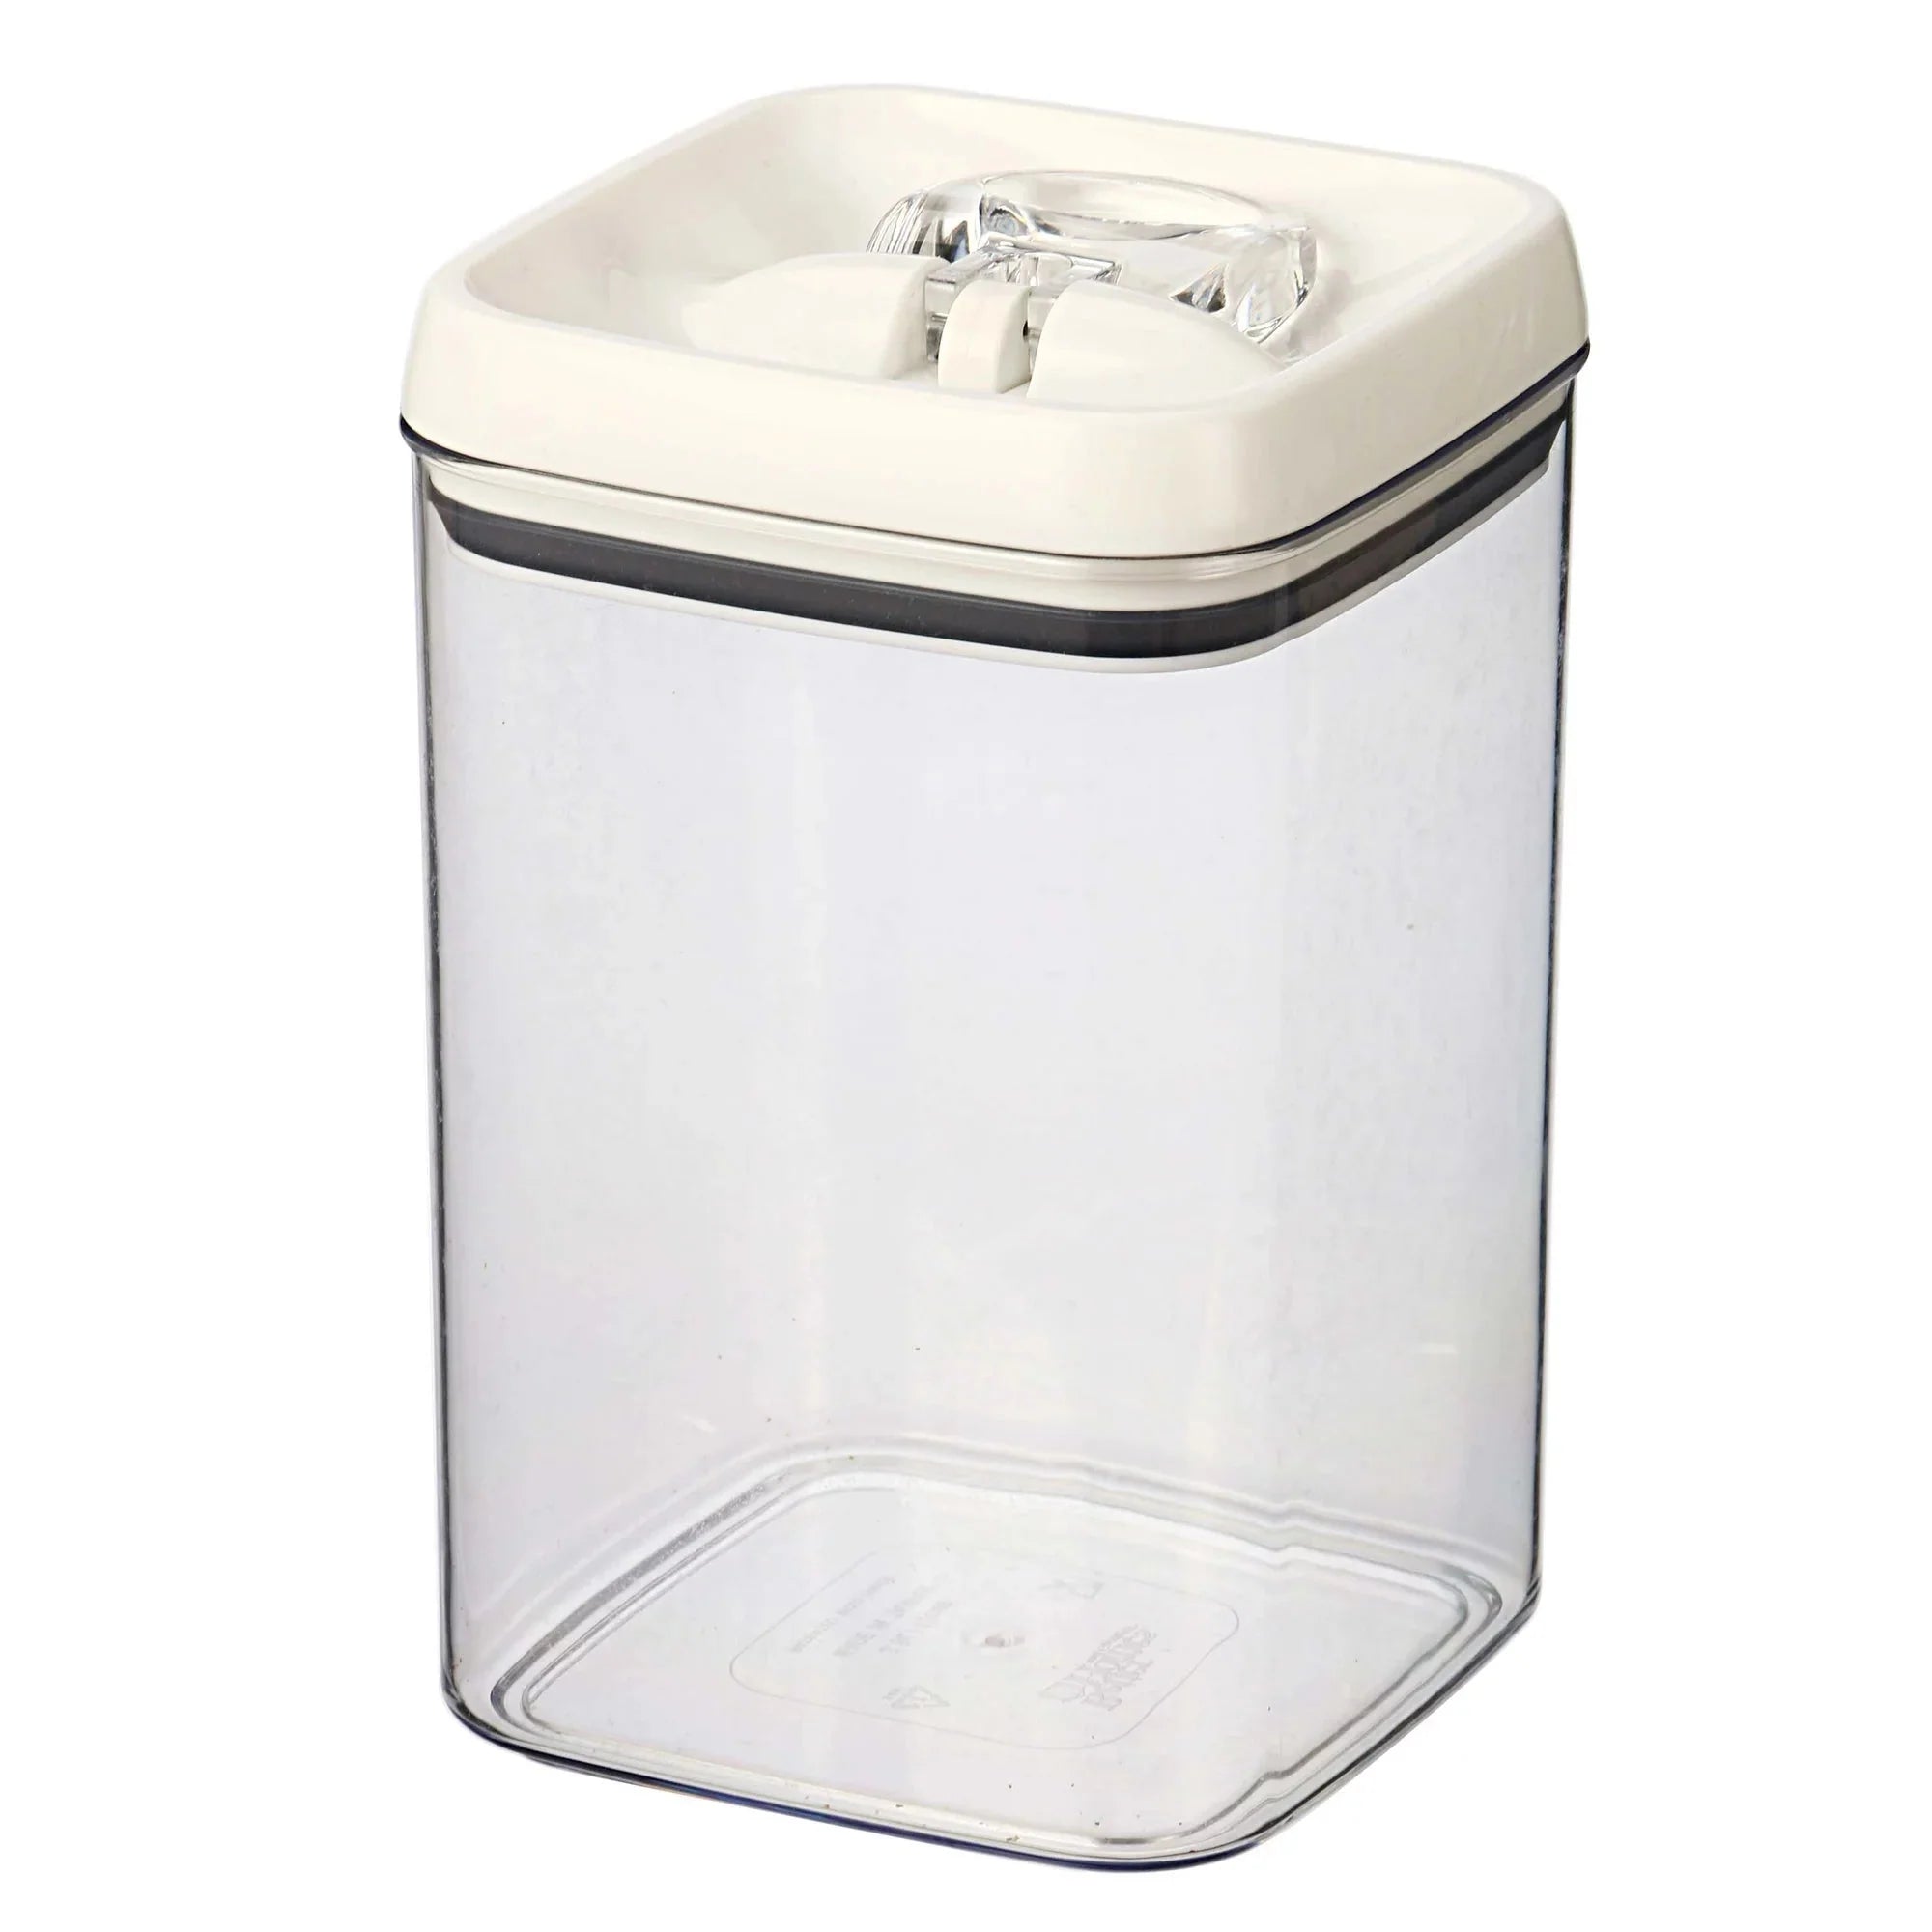 Wholesale prices with free shipping all over United States Better Homes & Gardens Canister - 16 Cup Flip-Tite Square Food Storage Container - Steven Deals